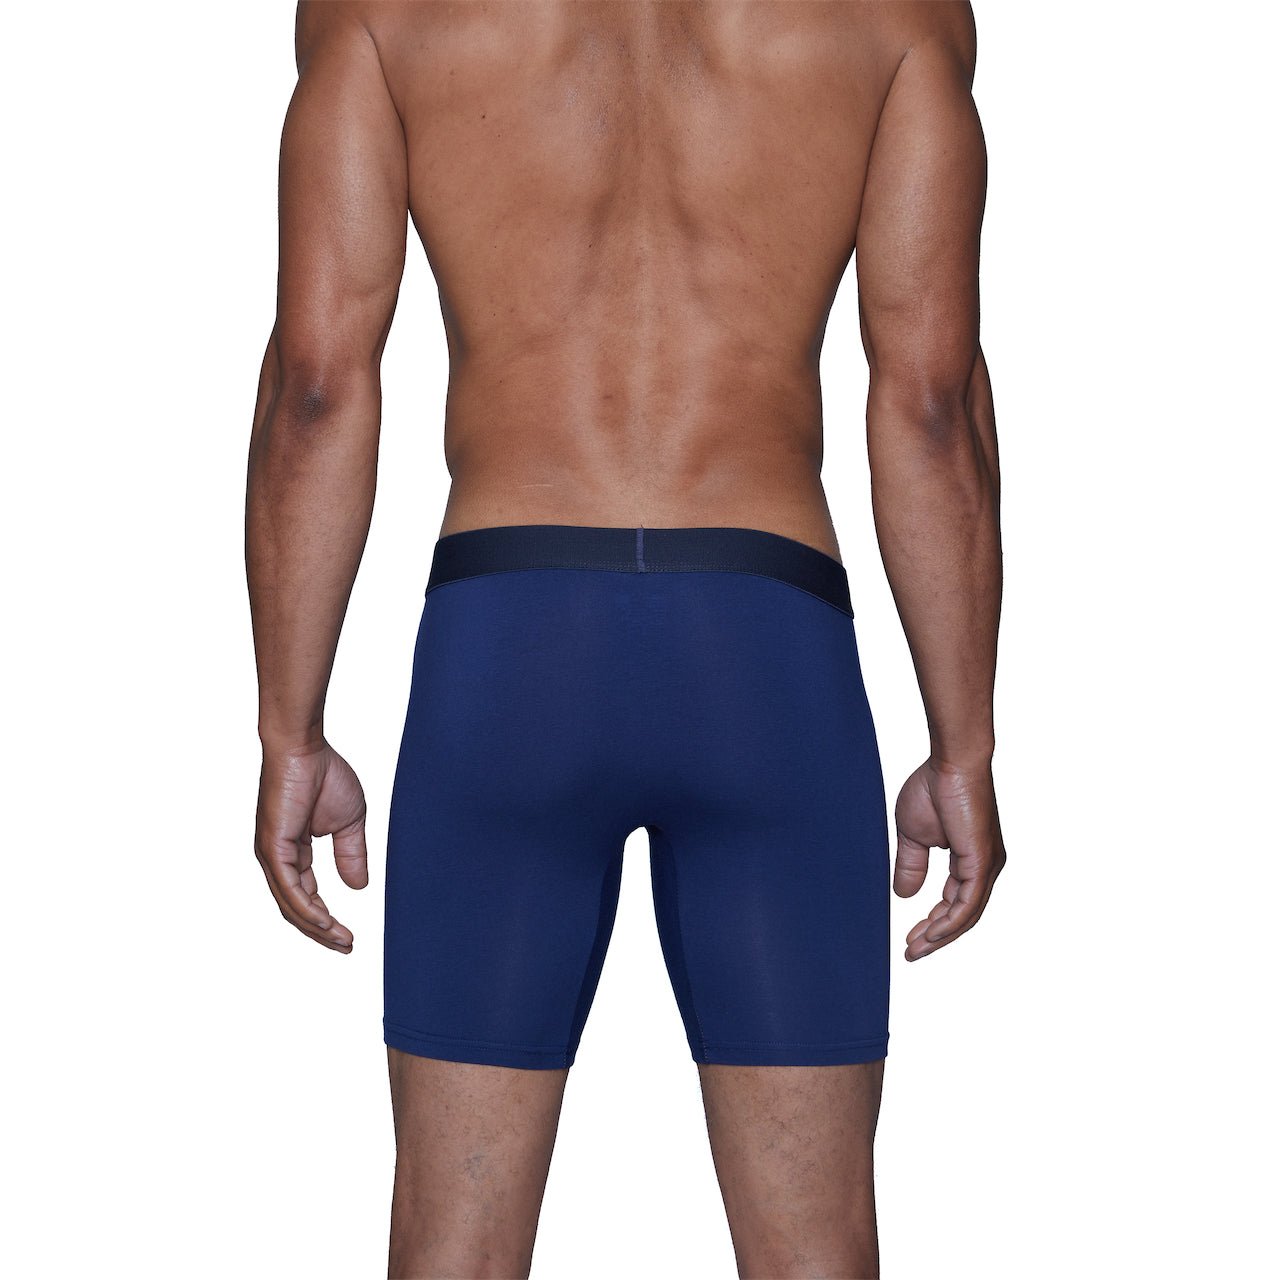 Men's Biker Brief with Fly from Wood - Pinned Up Bra Lounge